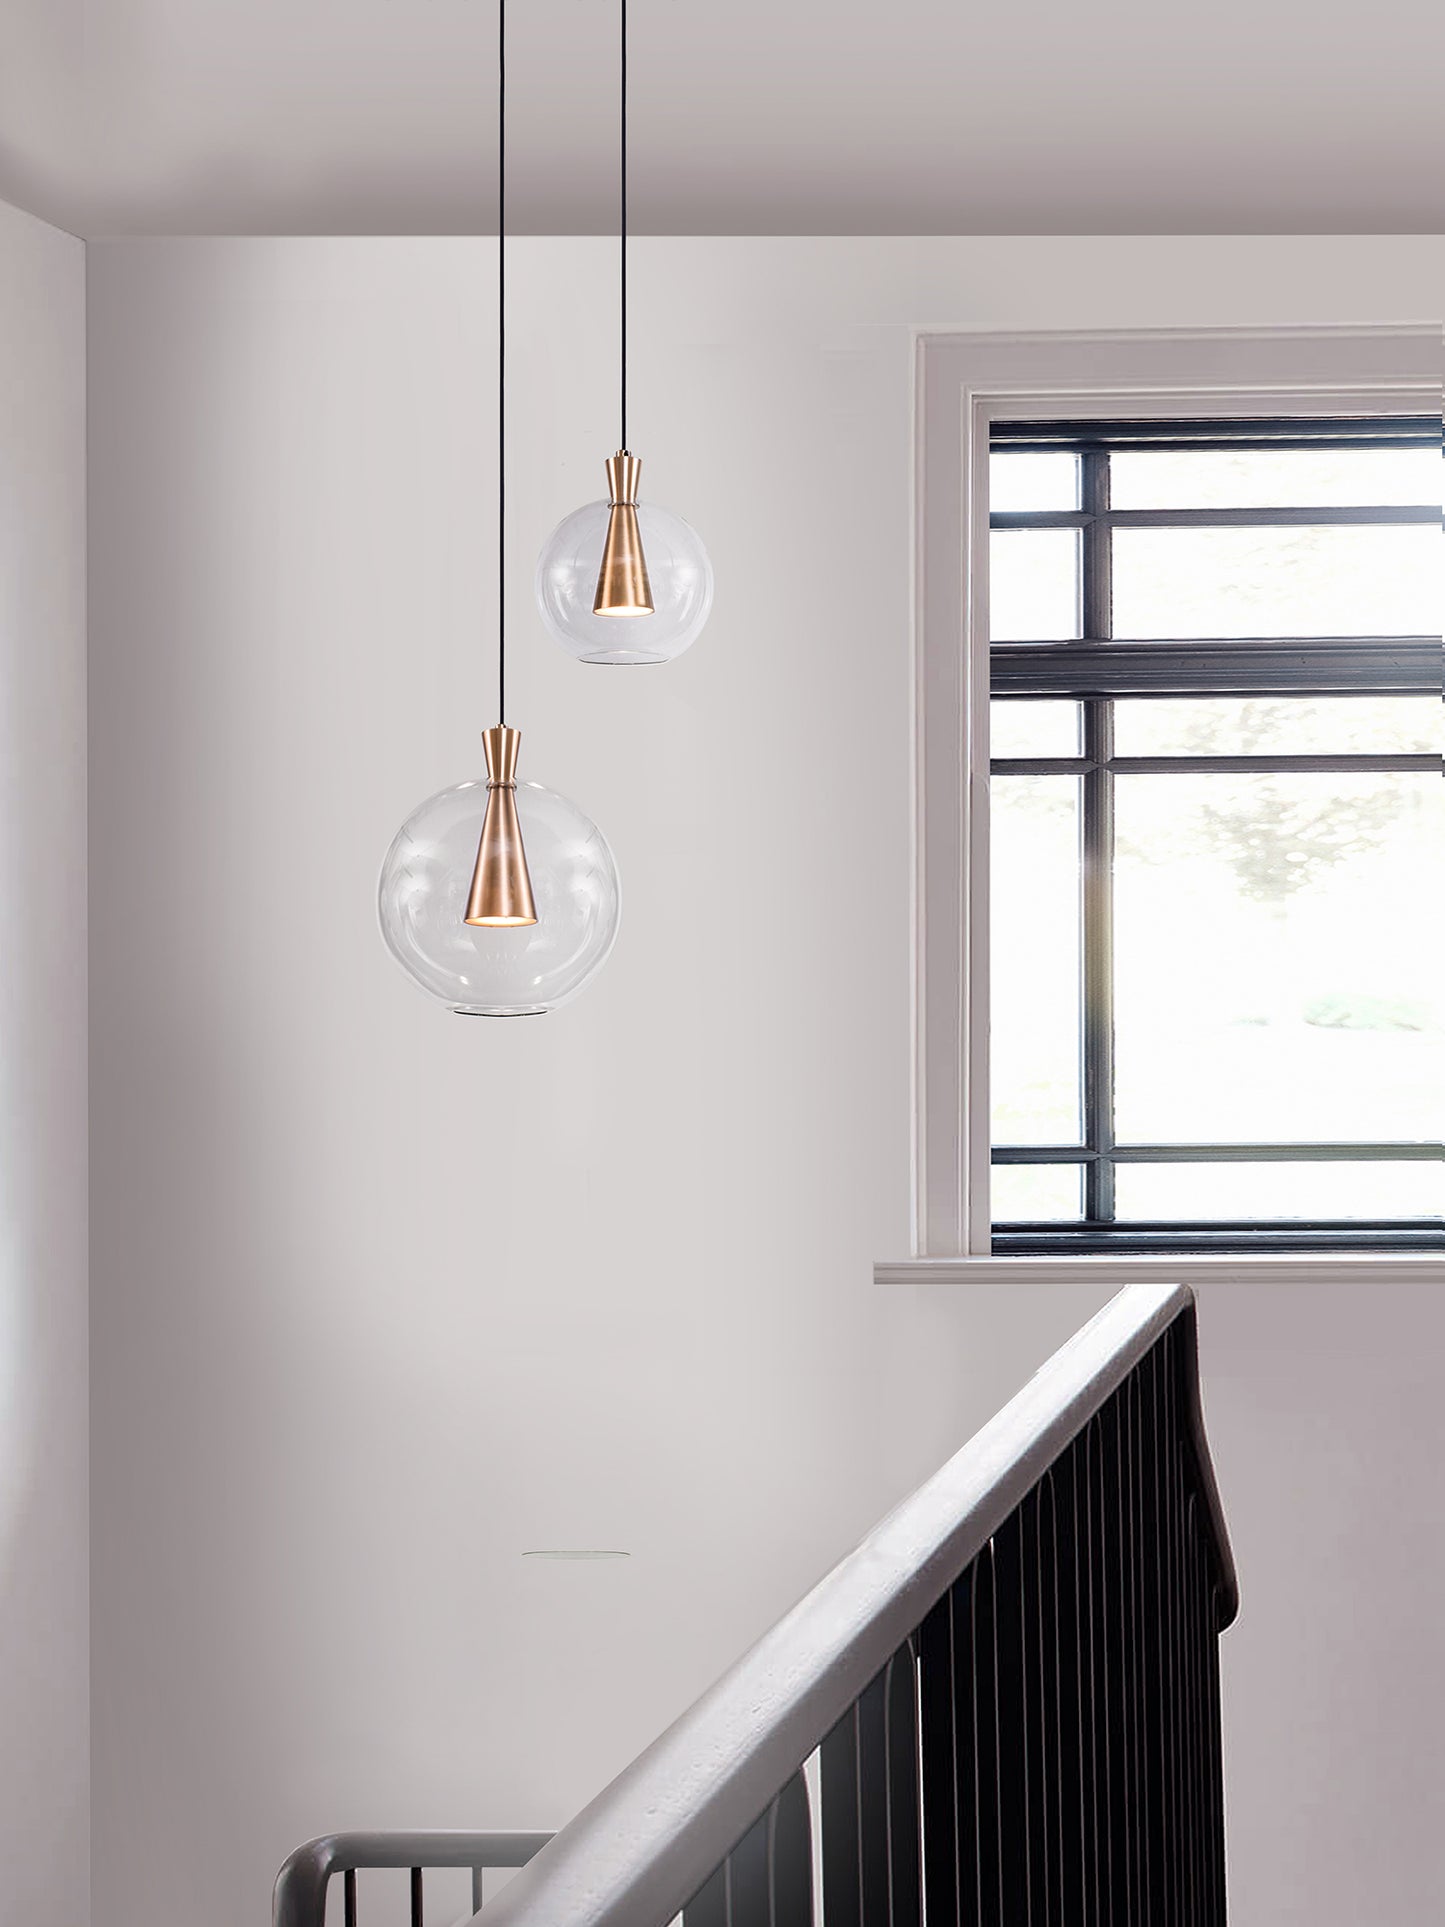 Cone Shade Pendant Light, hanging from ceiling above stairs.